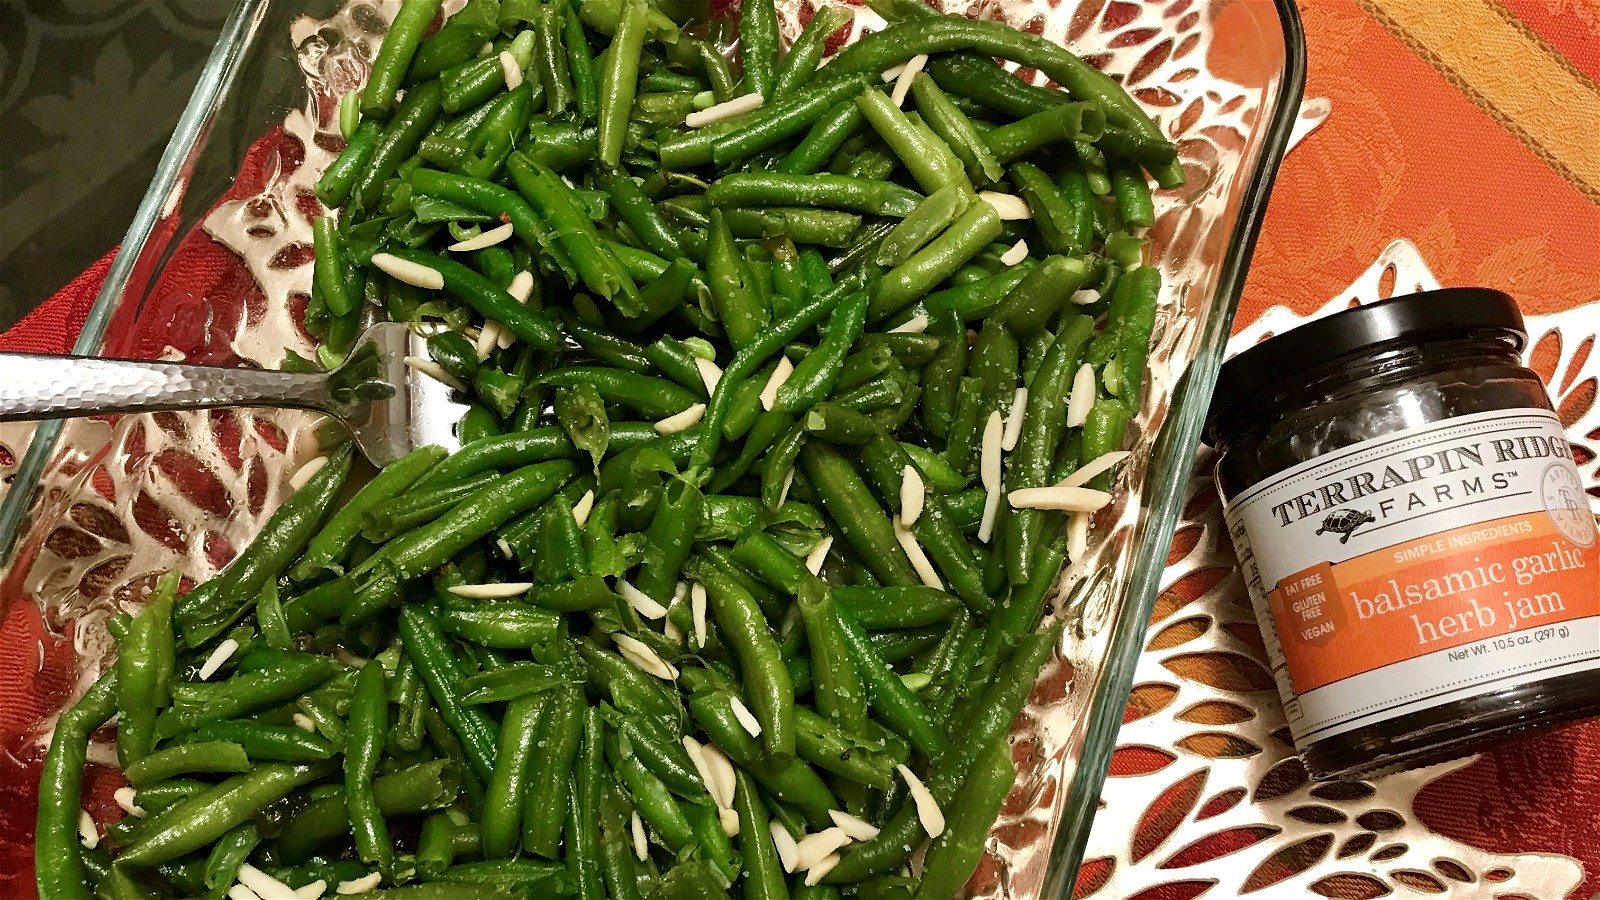 Image of Green Beans with Garlic, Herb and Balsamic